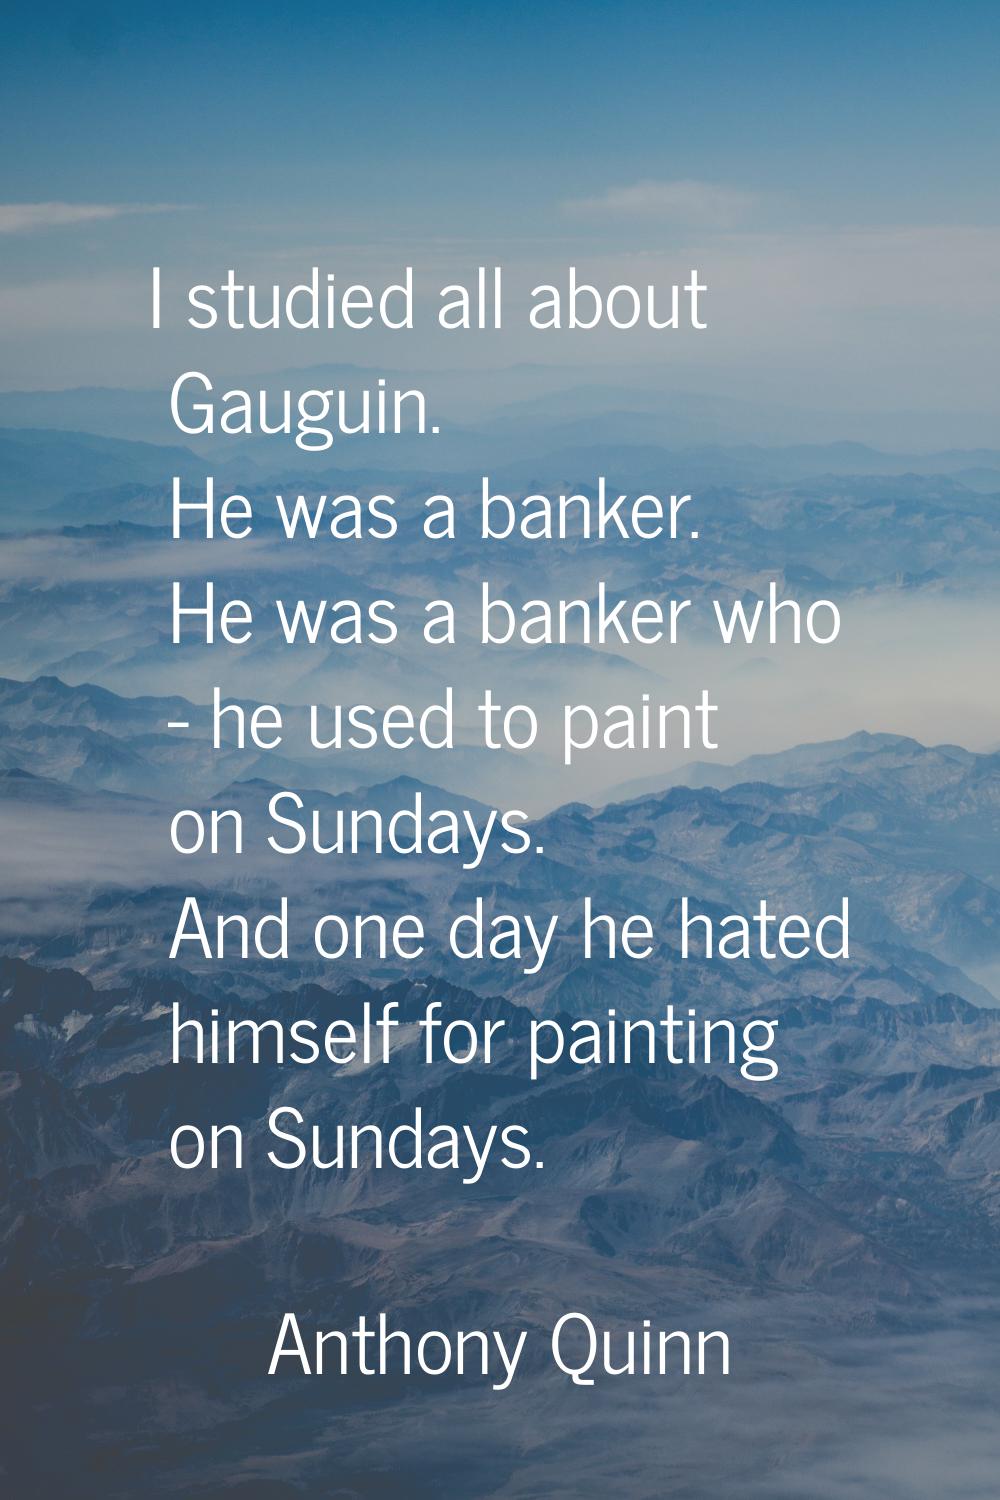 I studied all about Gauguin. He was a banker. He was a banker who - he used to paint on Sundays. An